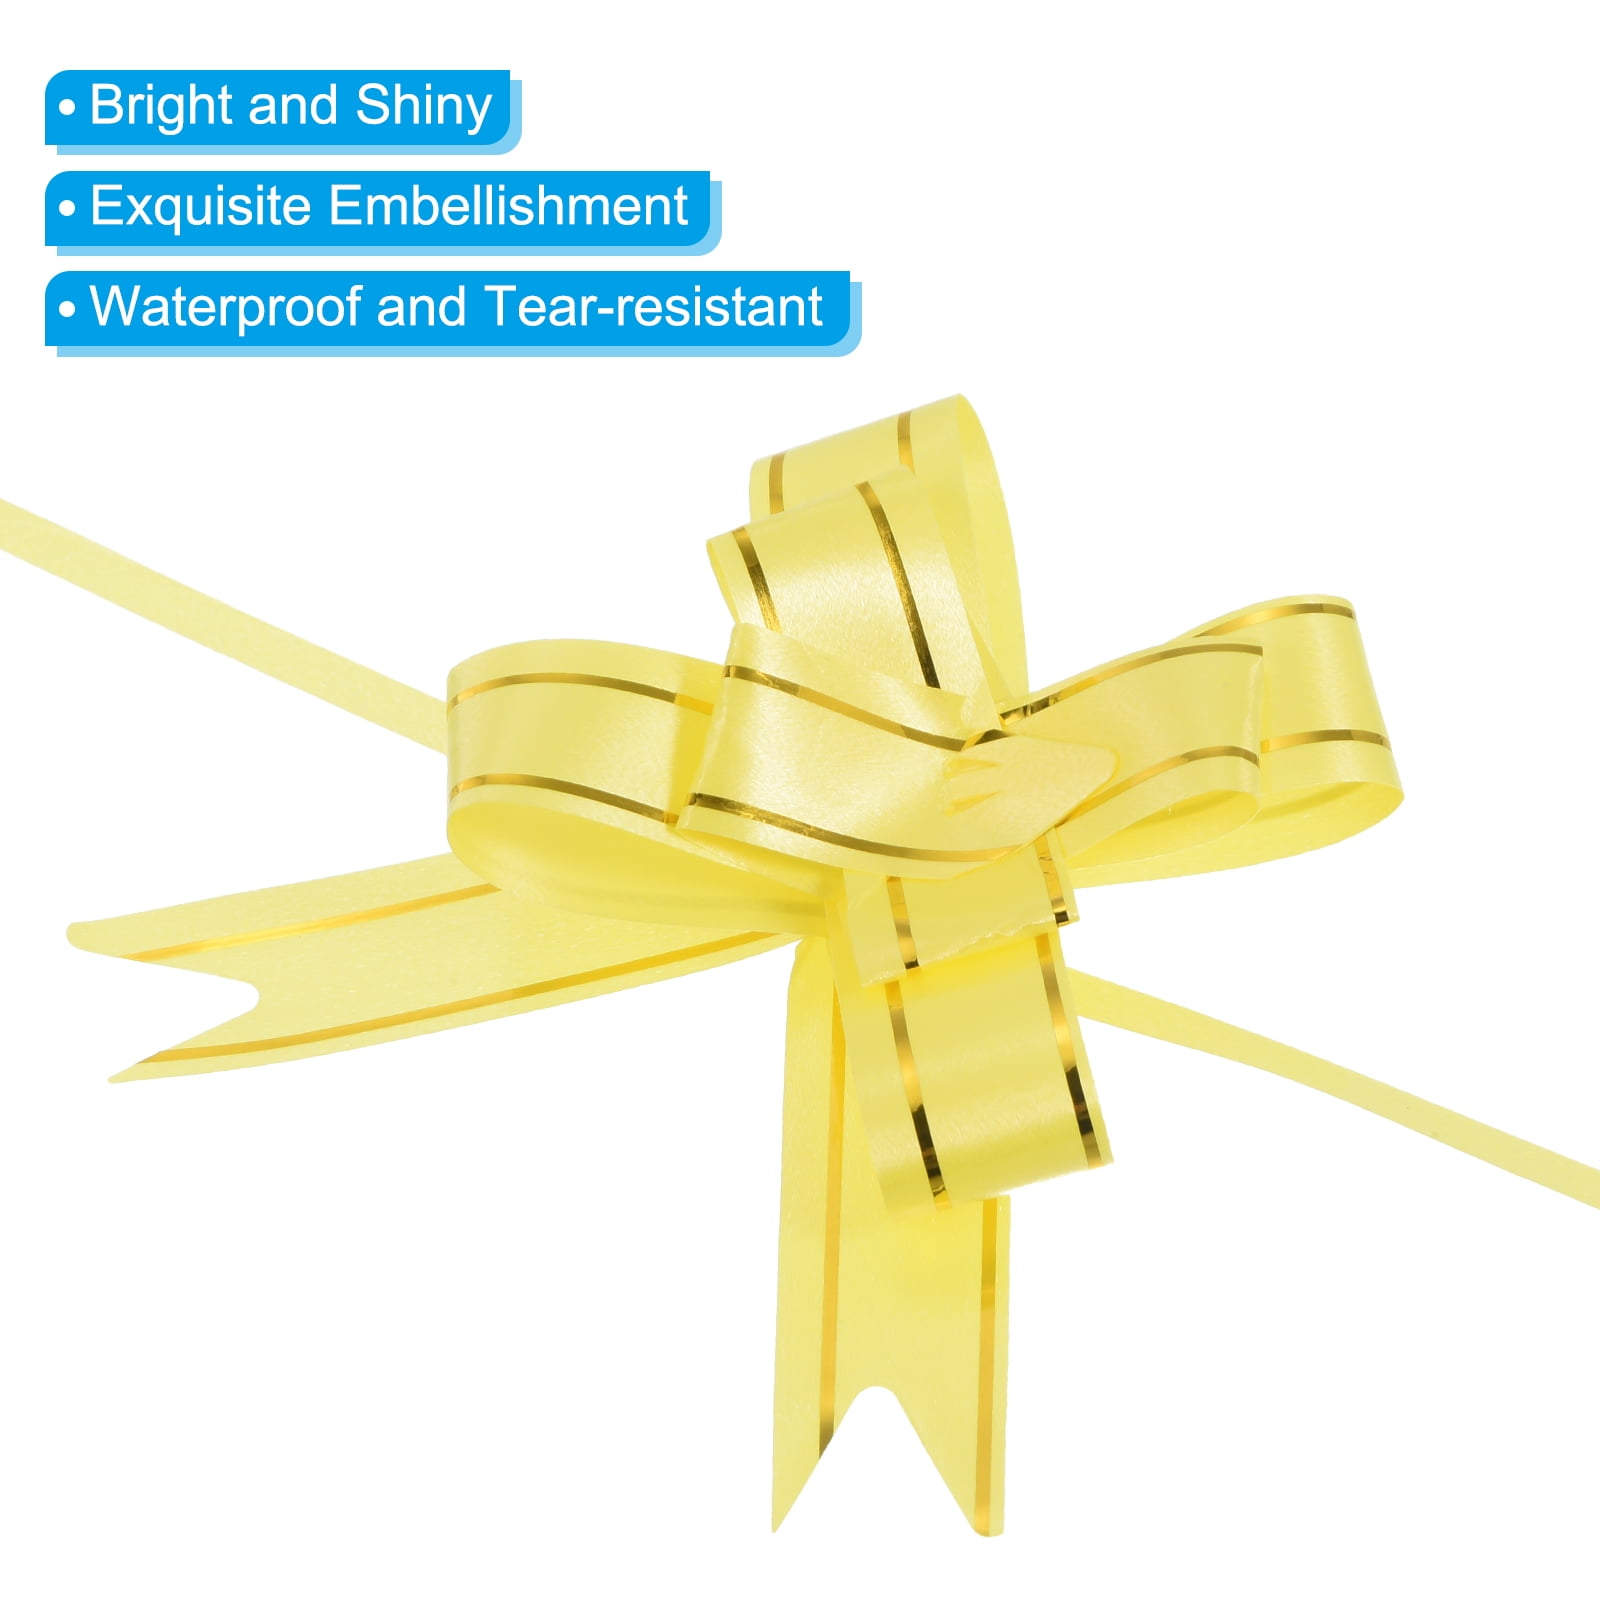 Uxcell 13 inch Pull Bows Ribbon Gift Wrapping String Gold Thread Style Decorative Bow Tie Gold Tone 100 Pack